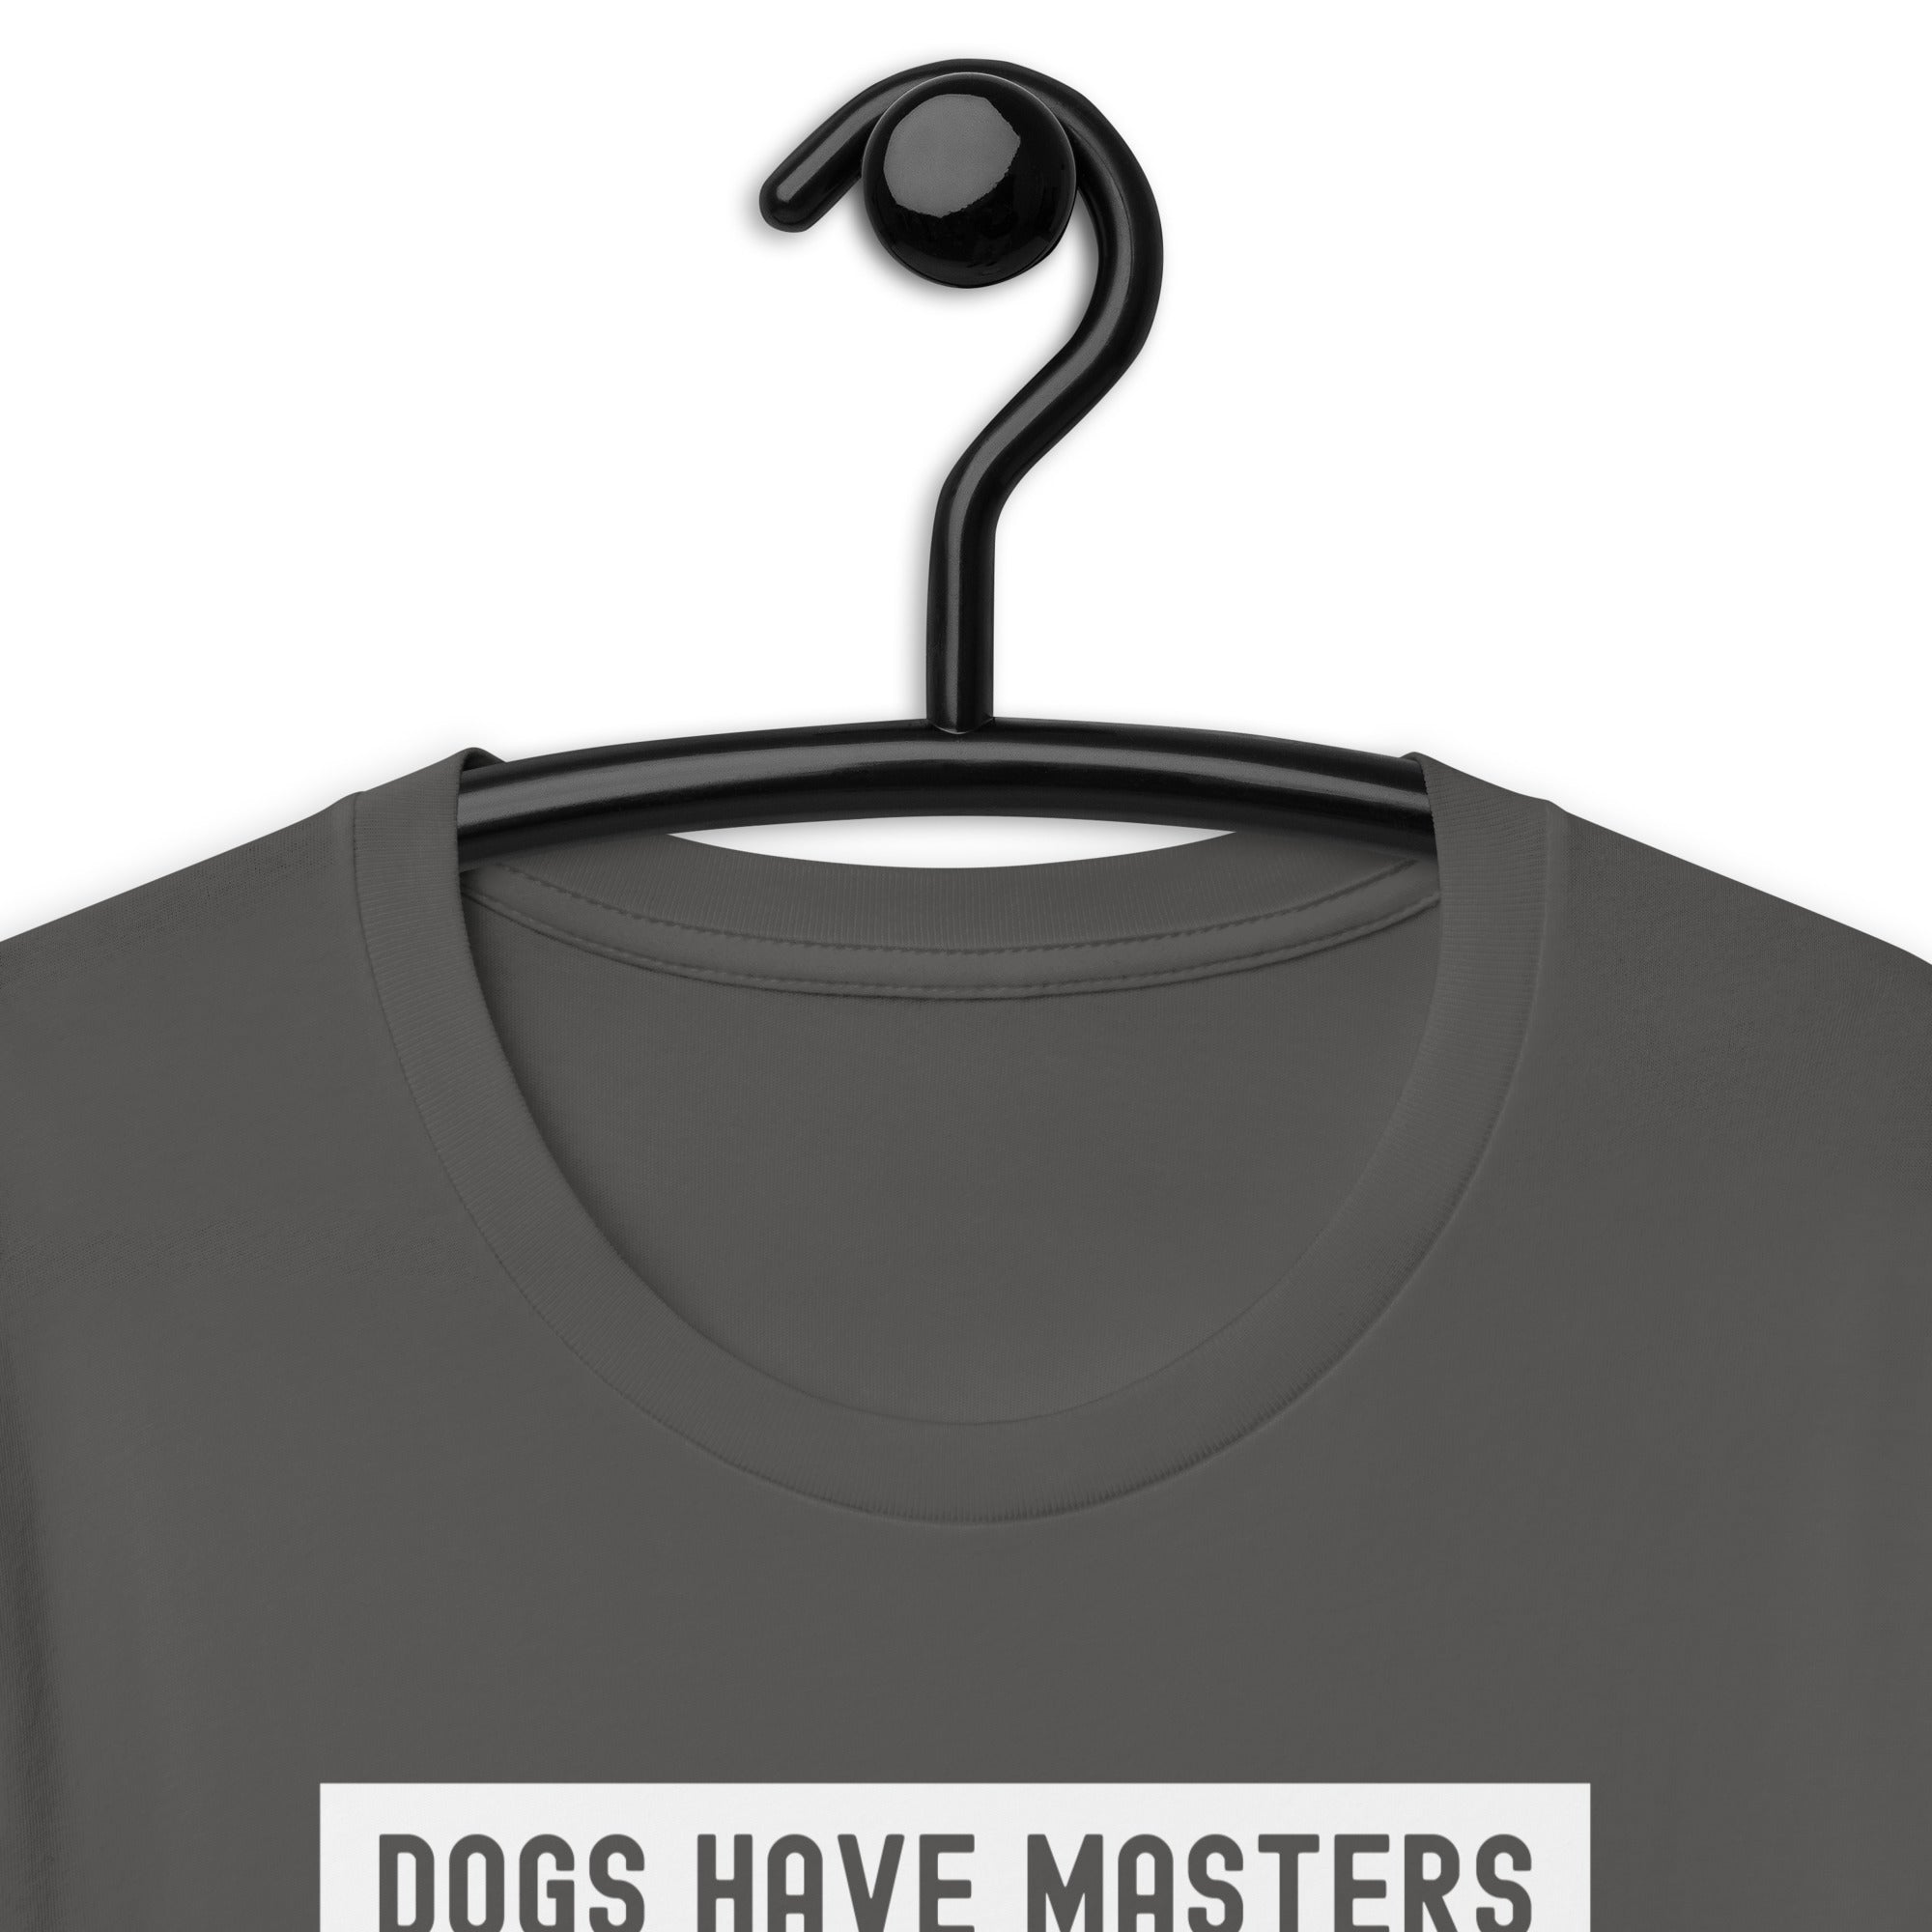 Unisex t-shirt | Dog have master cats have staff